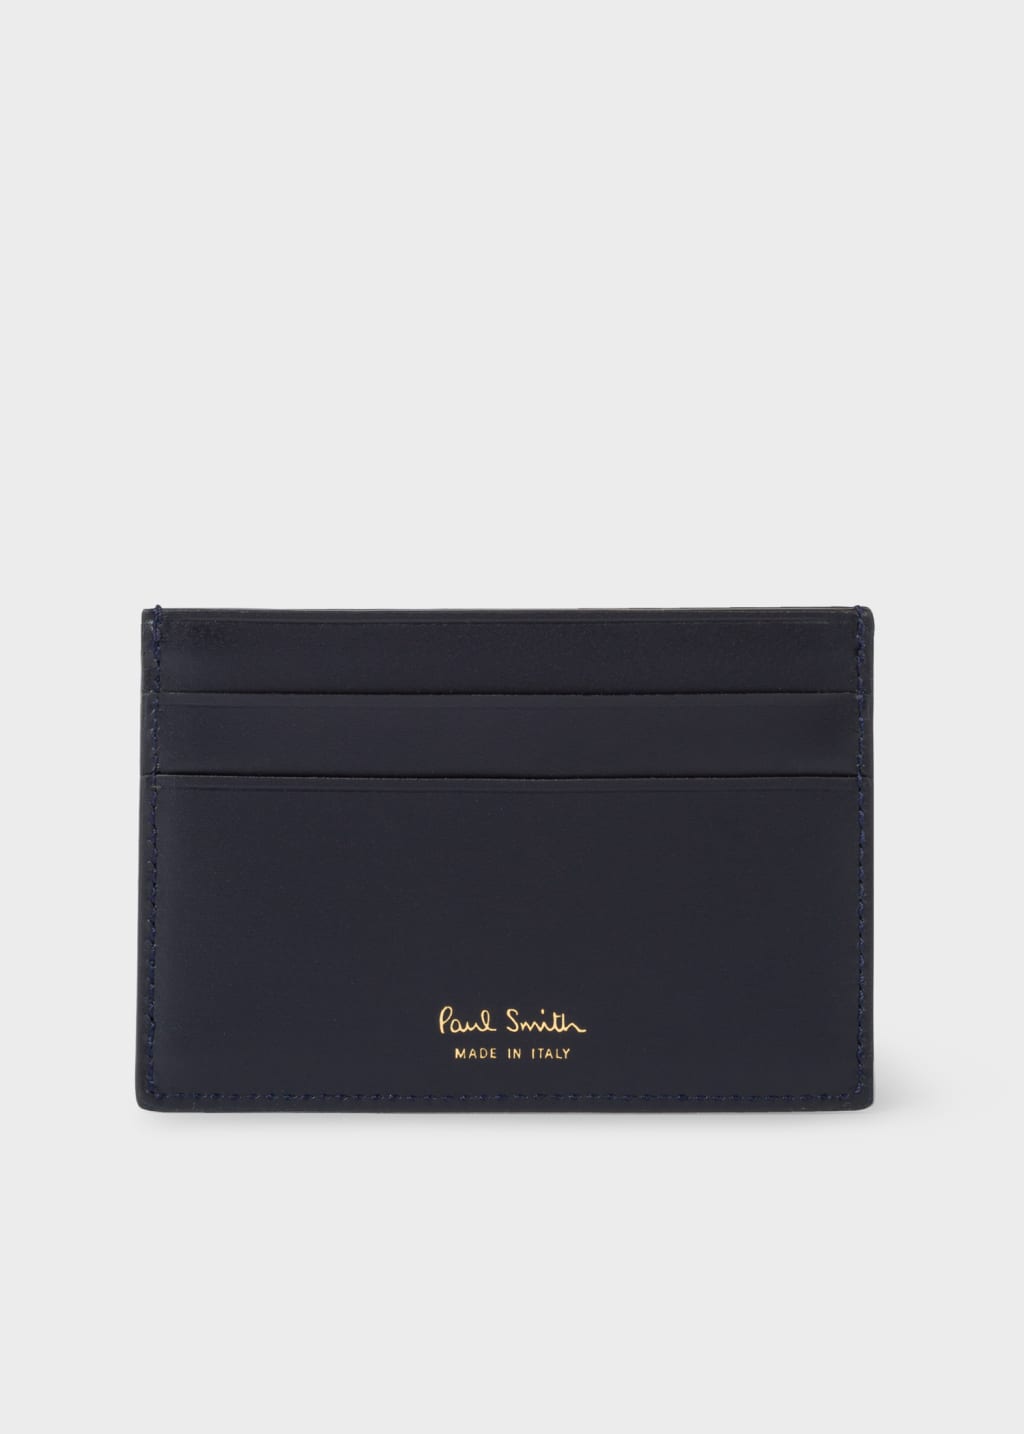 Front View - Navy Calf Leather Monogrammed Card Holder Paul Smith